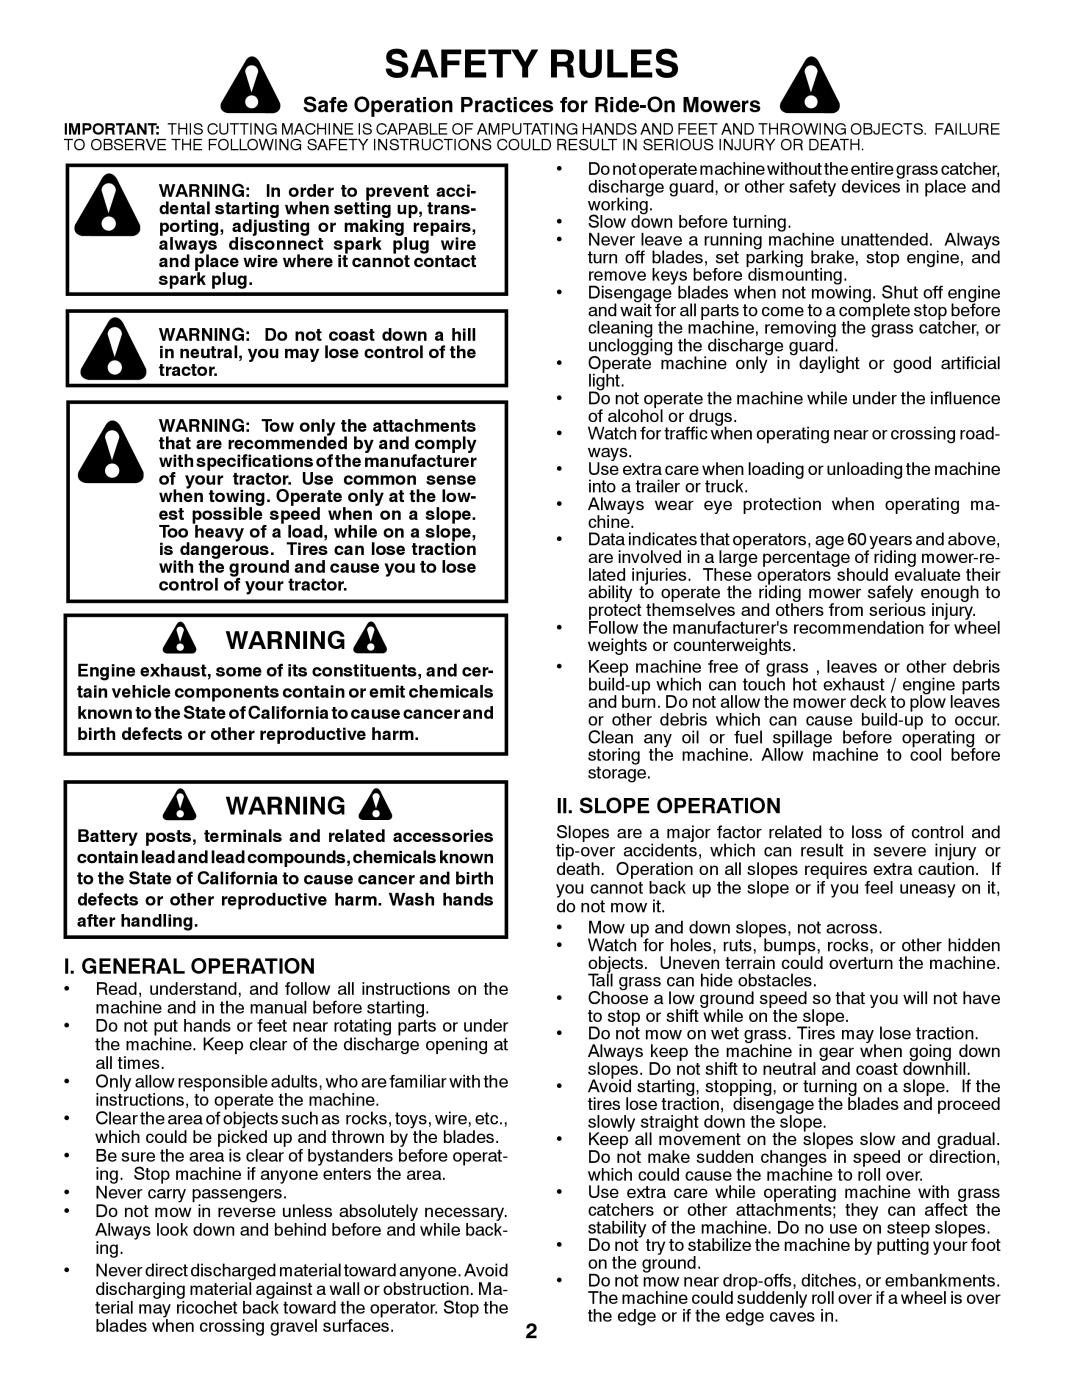 Poulan PO18542LT manual Safety Rules, Safe Operation Practices for Ride-OnMowers, I. General Operation, Ii. Slope Operation 